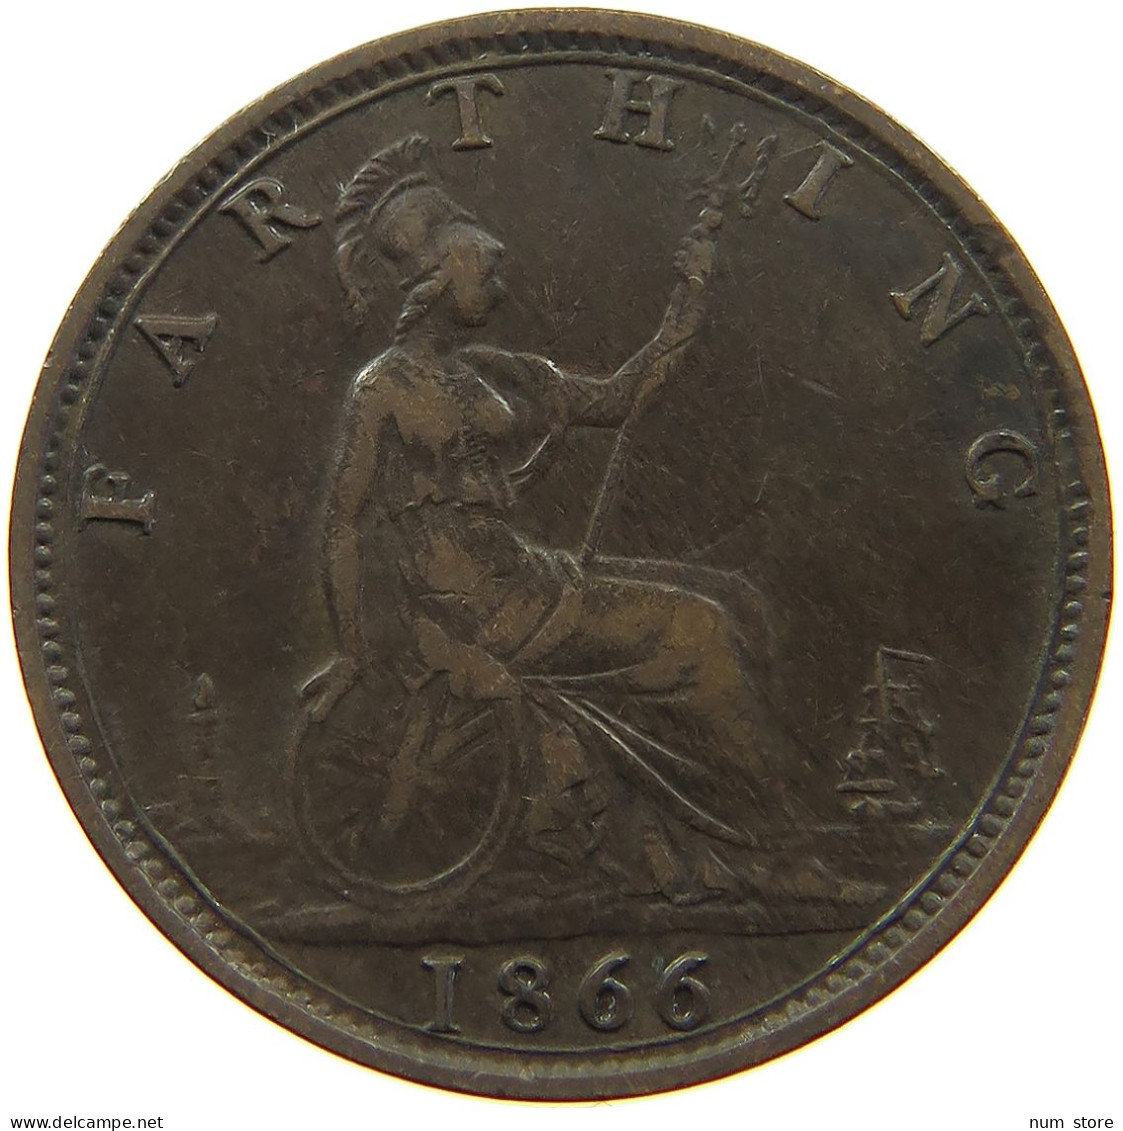 GREAT BRITAIN FARTHING 1866 Victoria 1837-1901 #a011 0823 - B. 1 Farthing